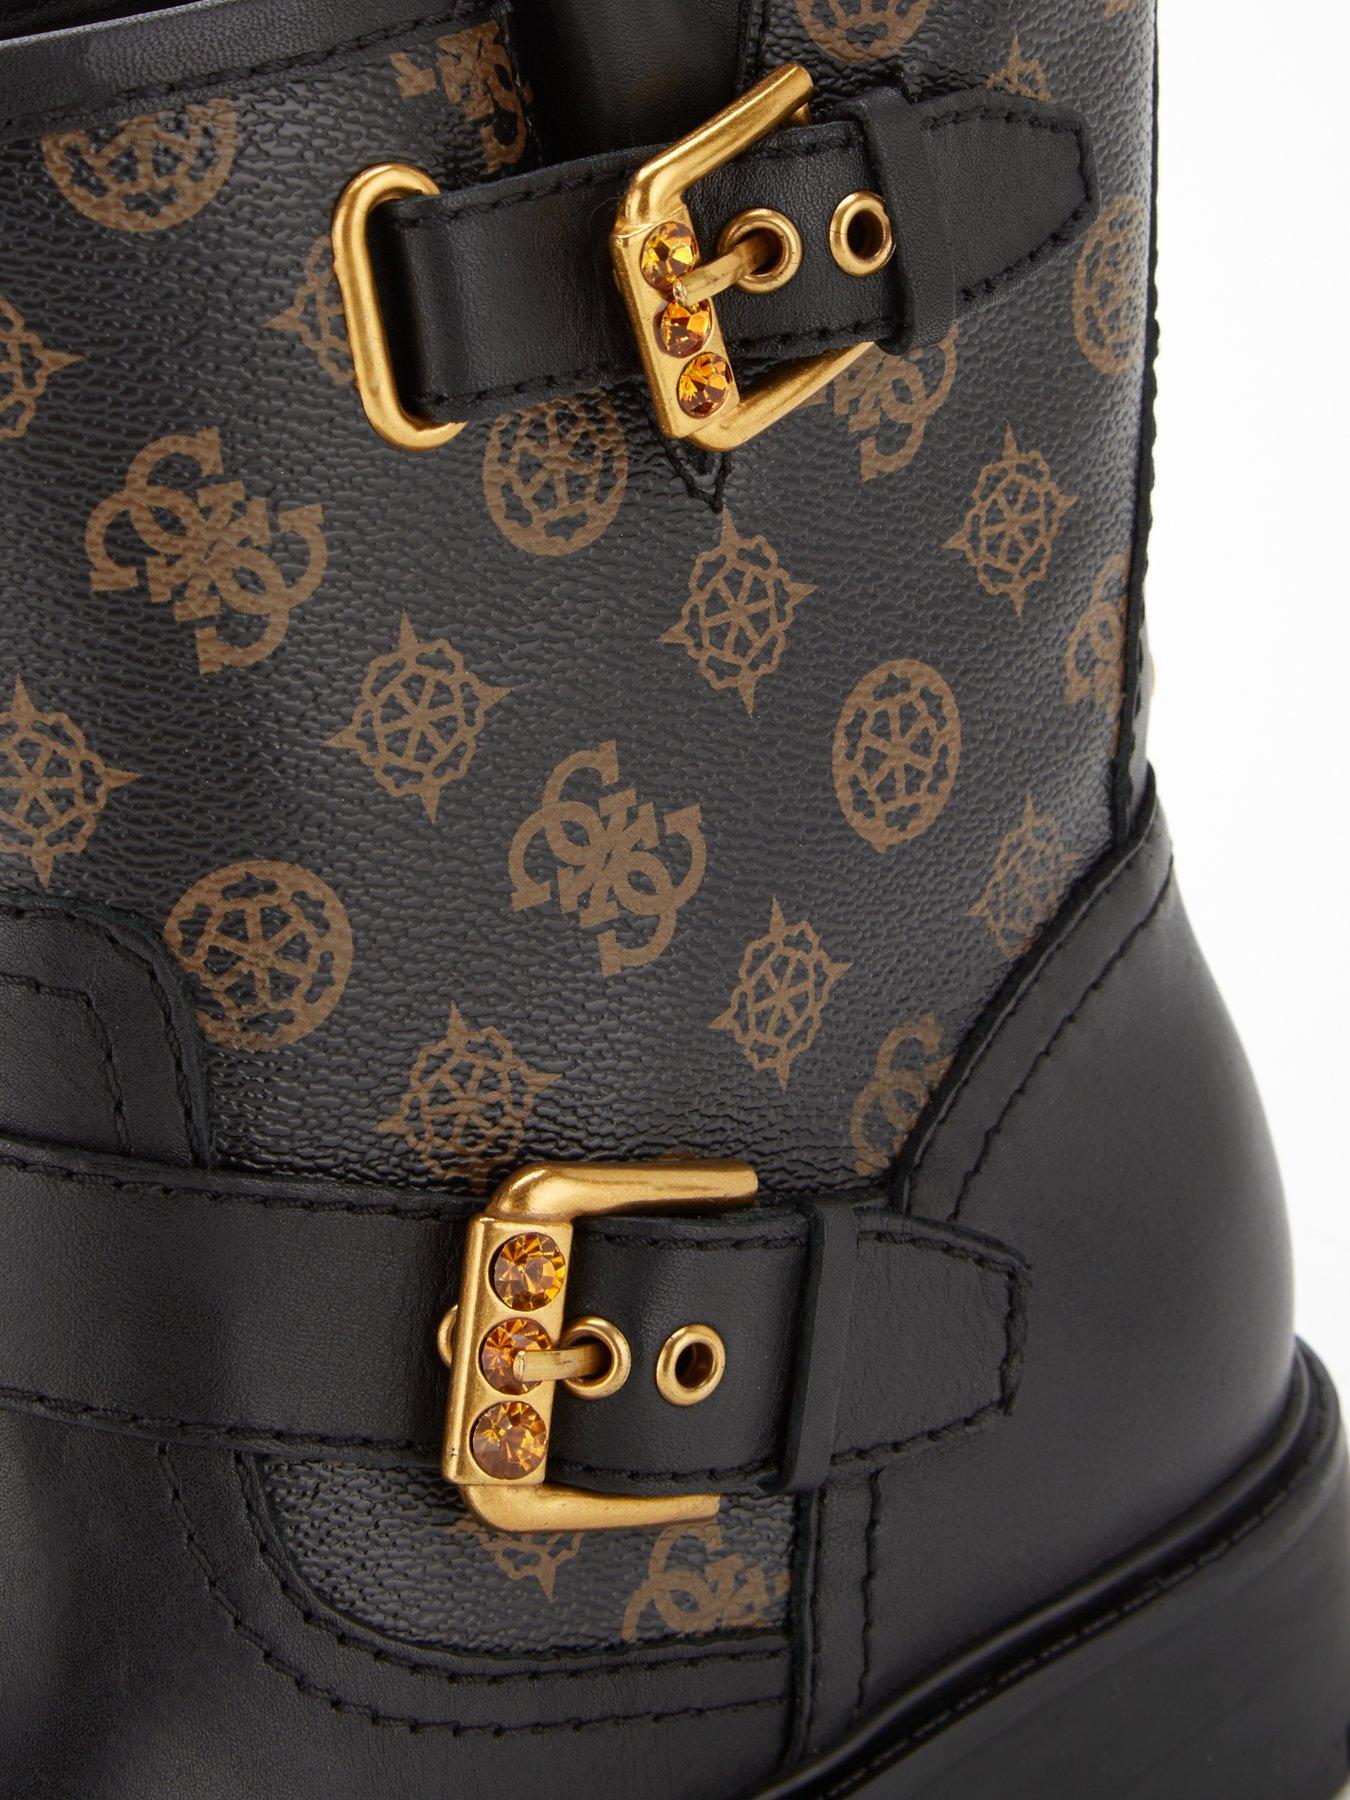 Shoes & boots Double Buckle Logo Print Ankle Boots - Black